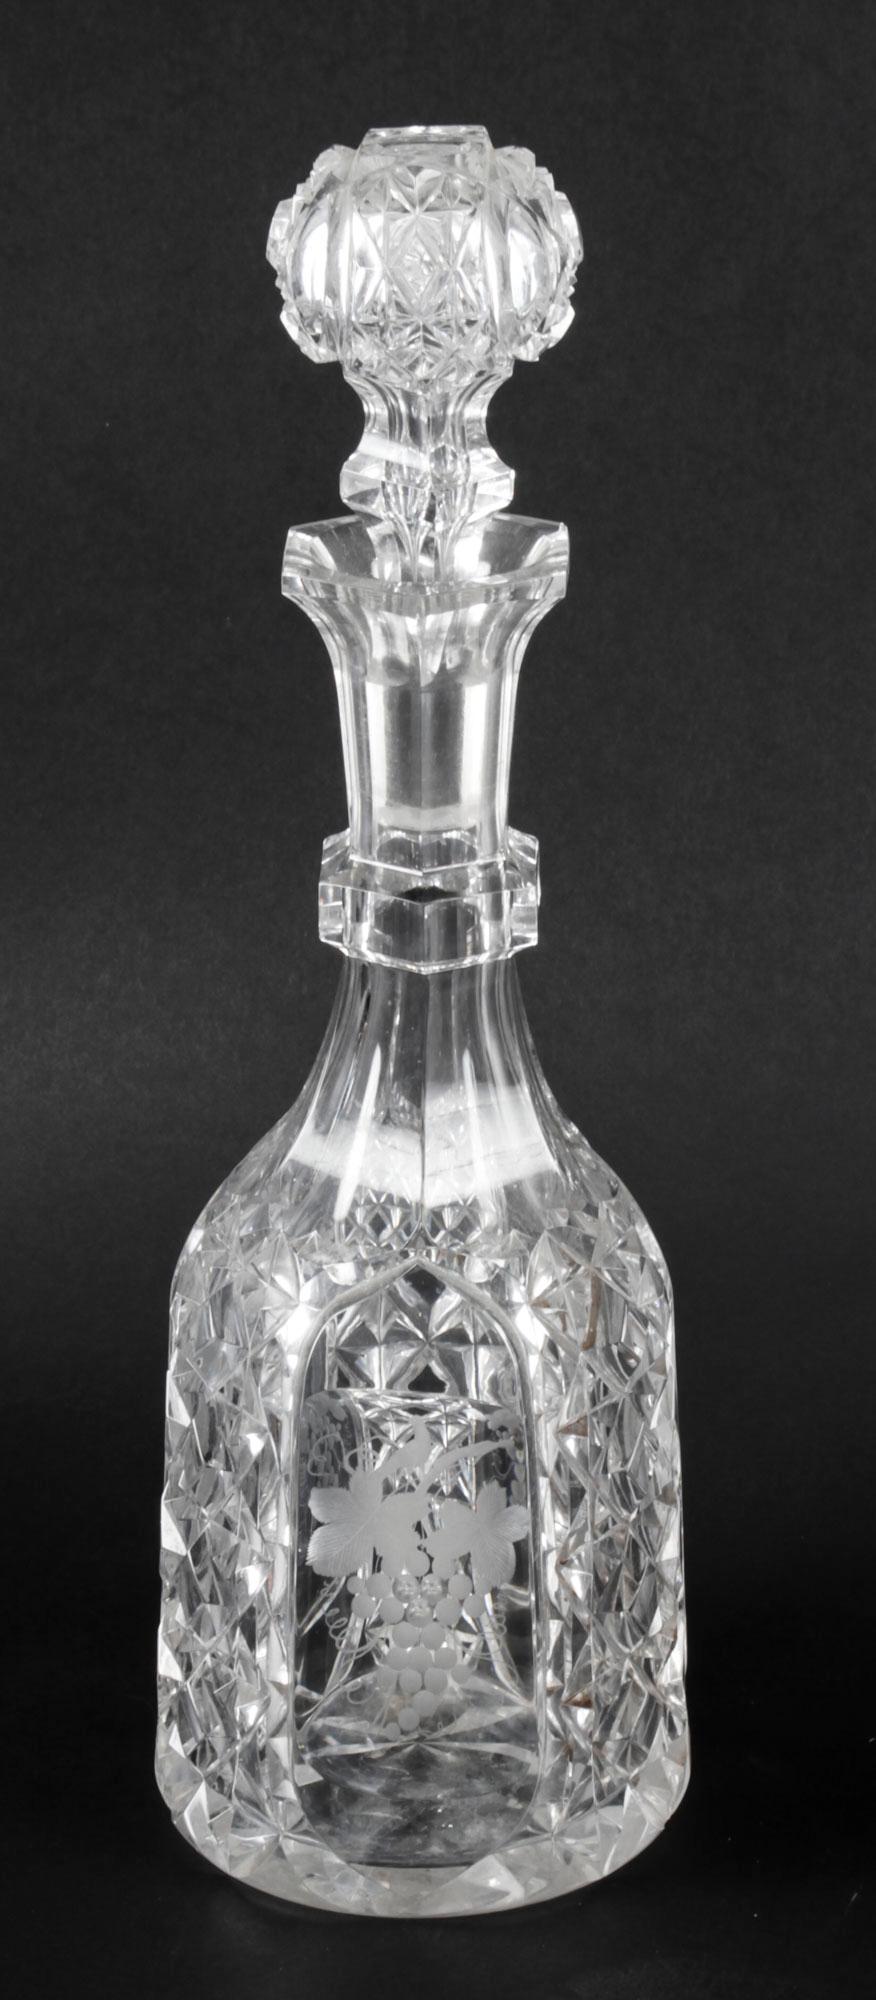 A superb pair of antique cut glass wine decanters and stoppers having etched grapes to the panelled sides and Circa 1870 in date.

This lovely pair can serve decorative as well as practical purposes.

Add a touch of class to your next dining